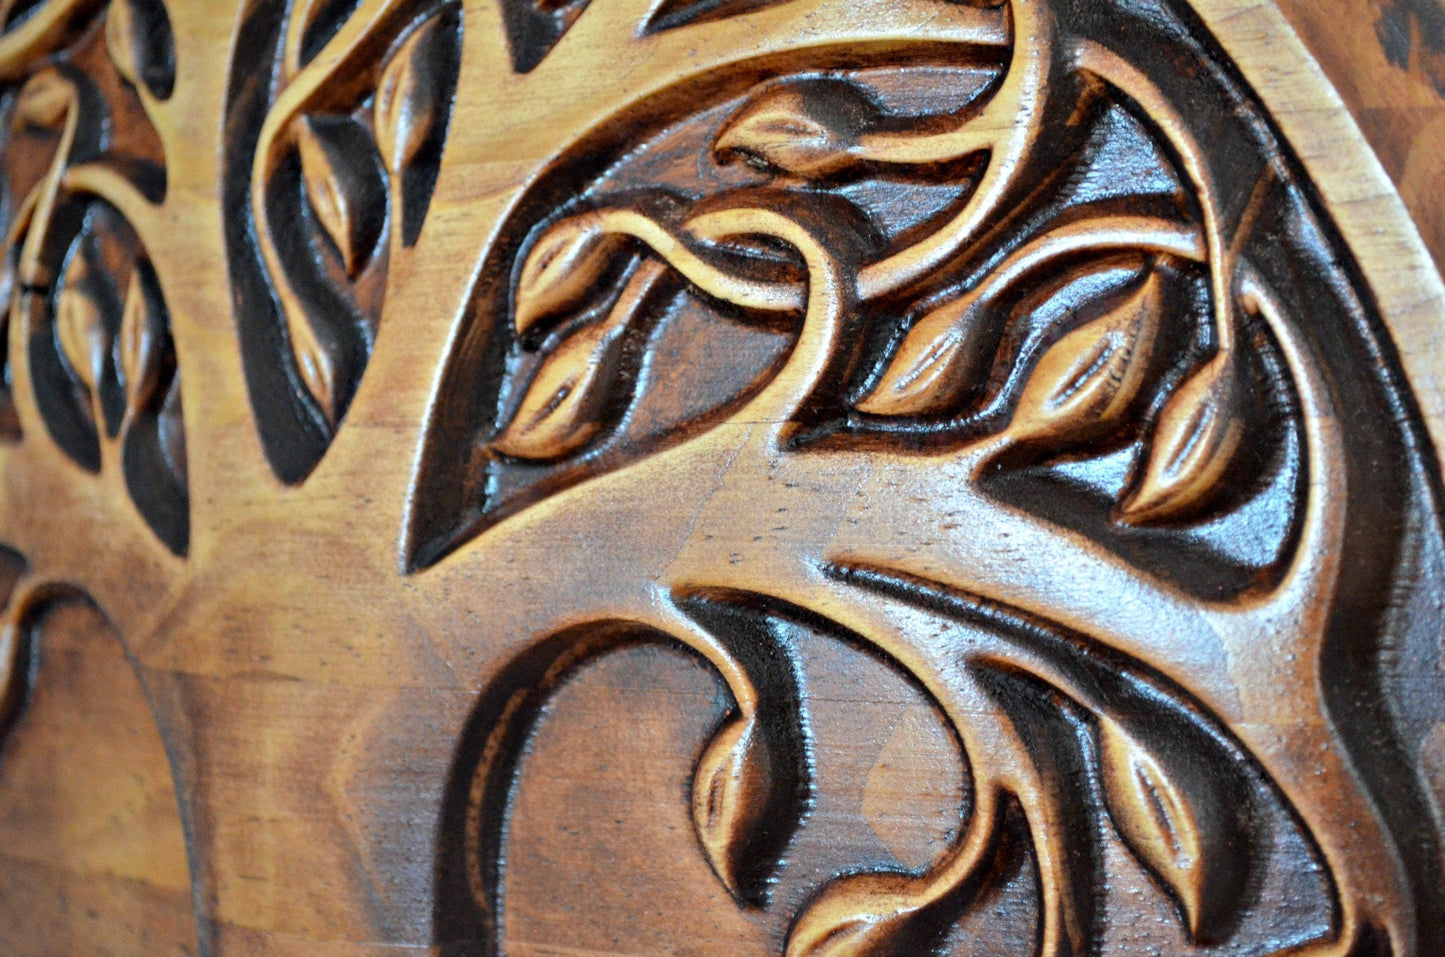 Tree of life 3d wood carving, yew tree wood carving, cnc router cut, brown mahogany stain